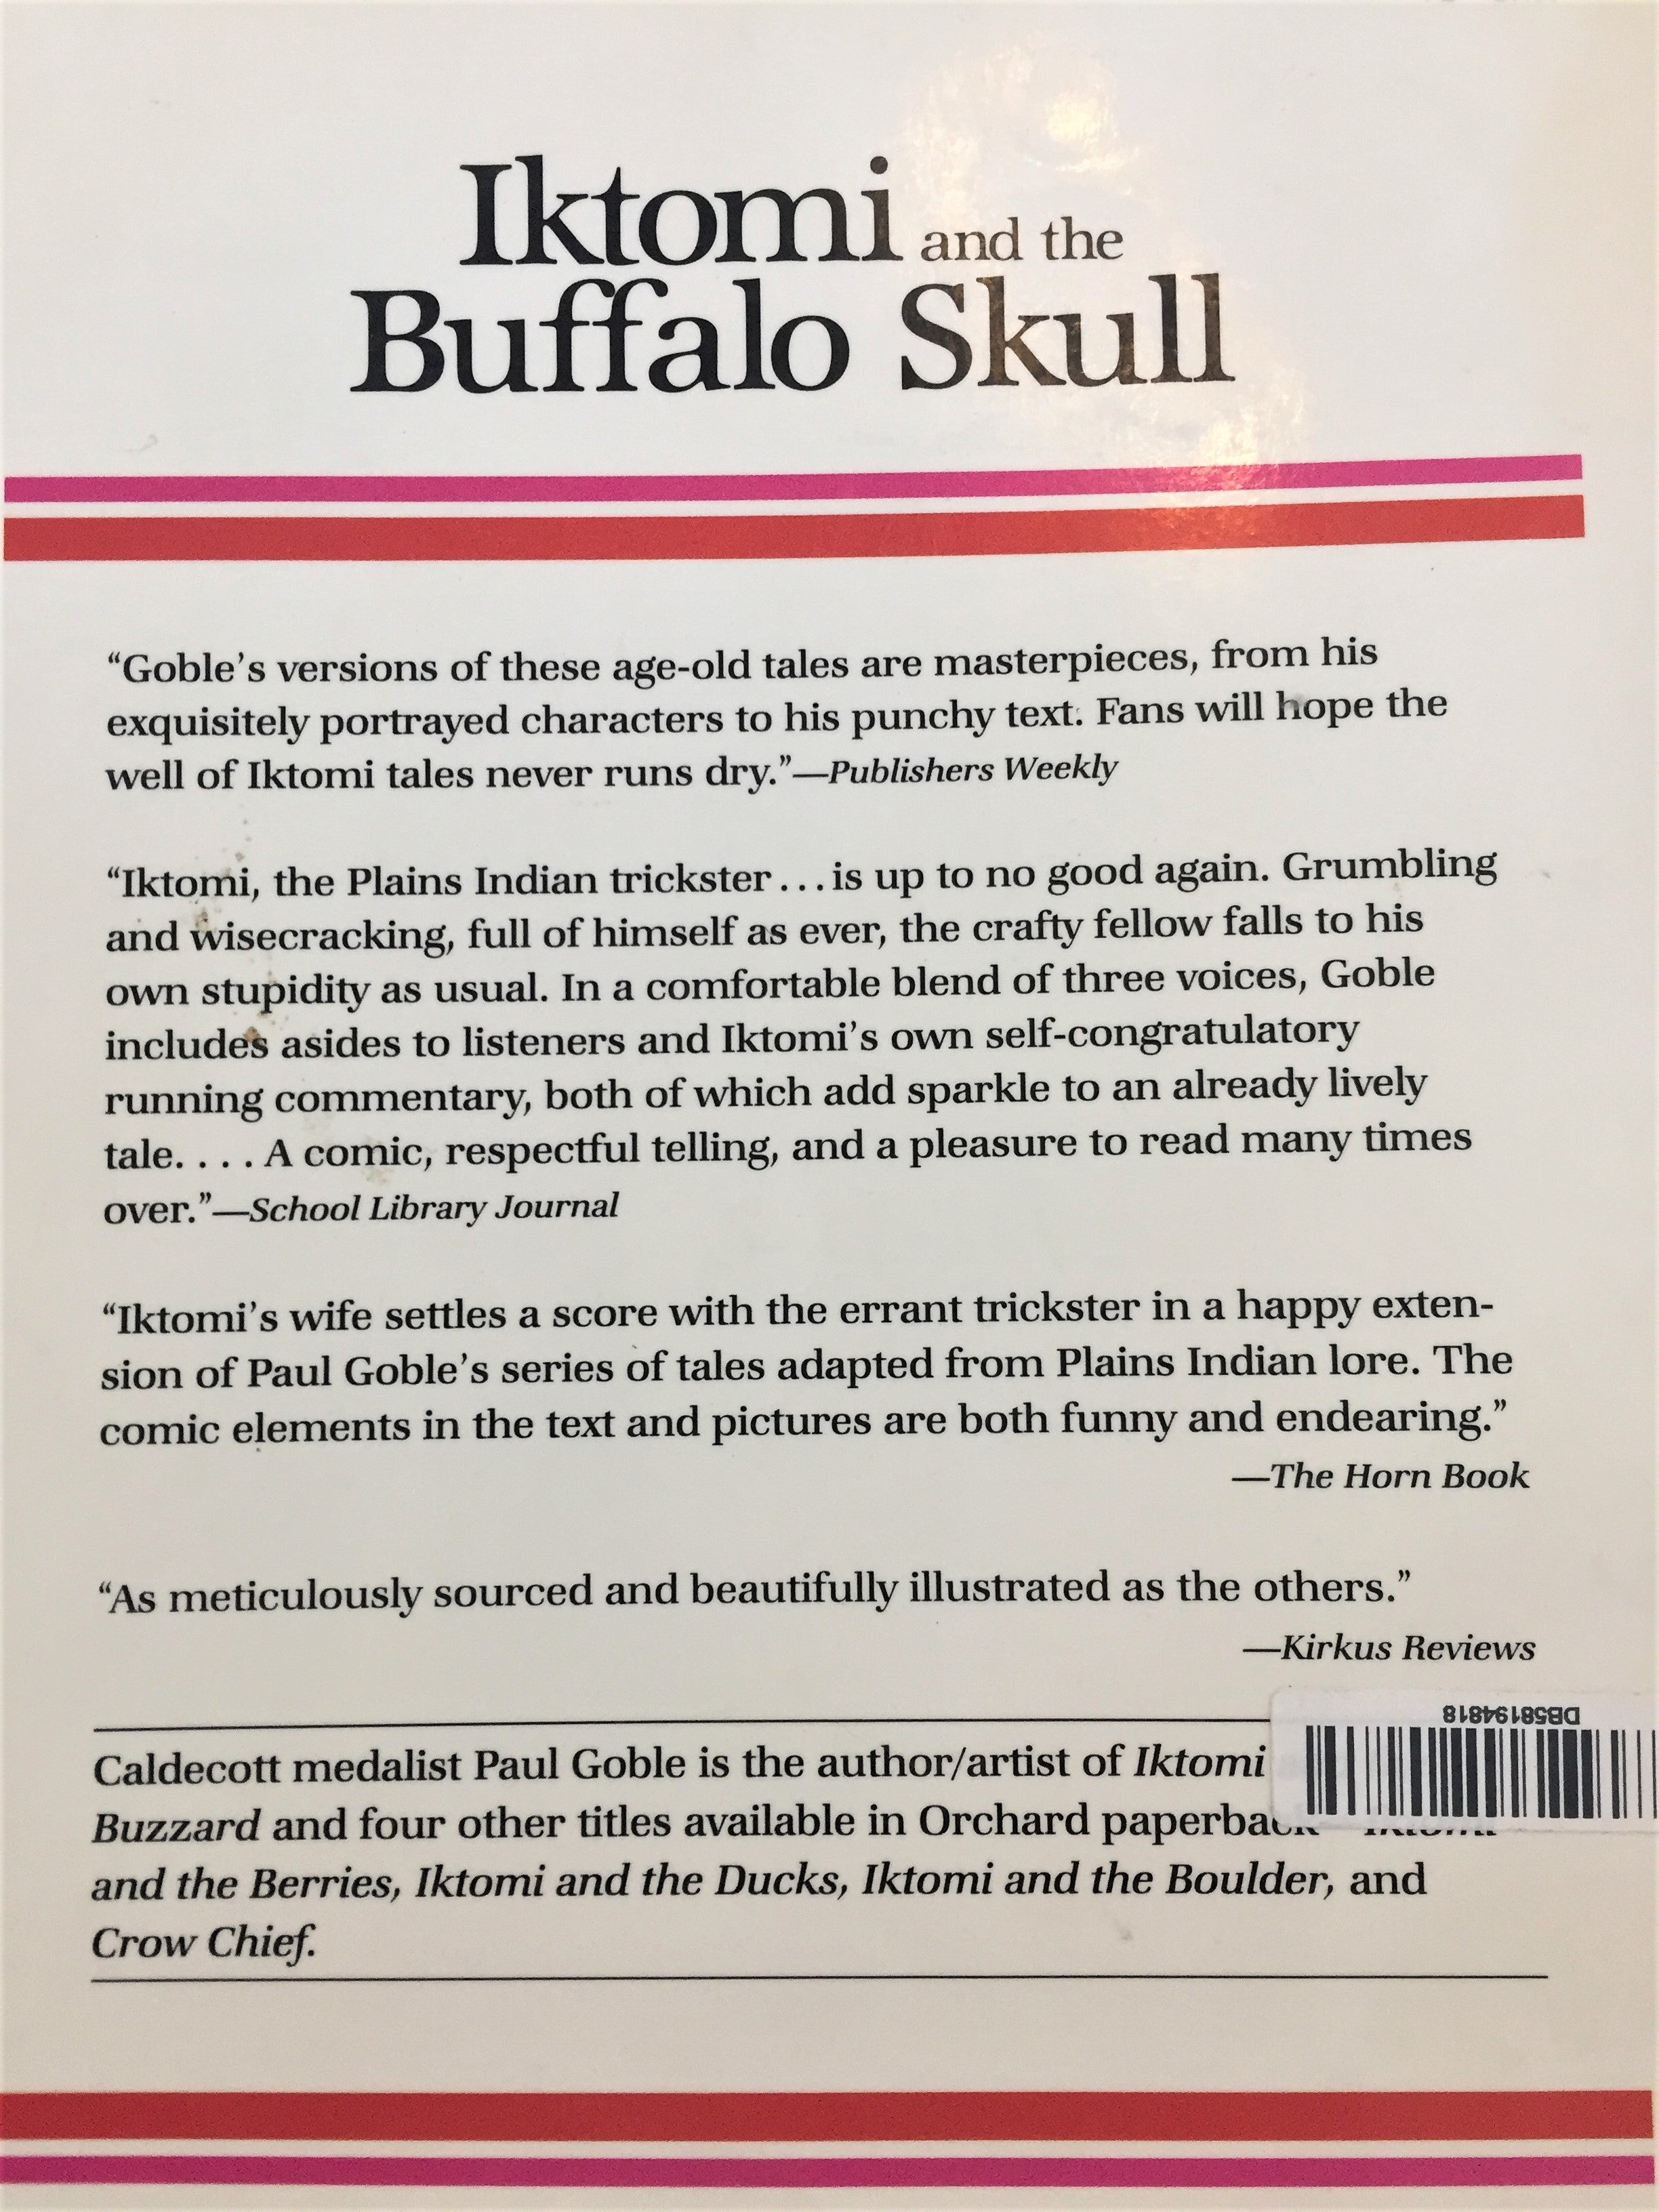 BOOKS - Iktomi and the Buffalo Skull by Paul Goble